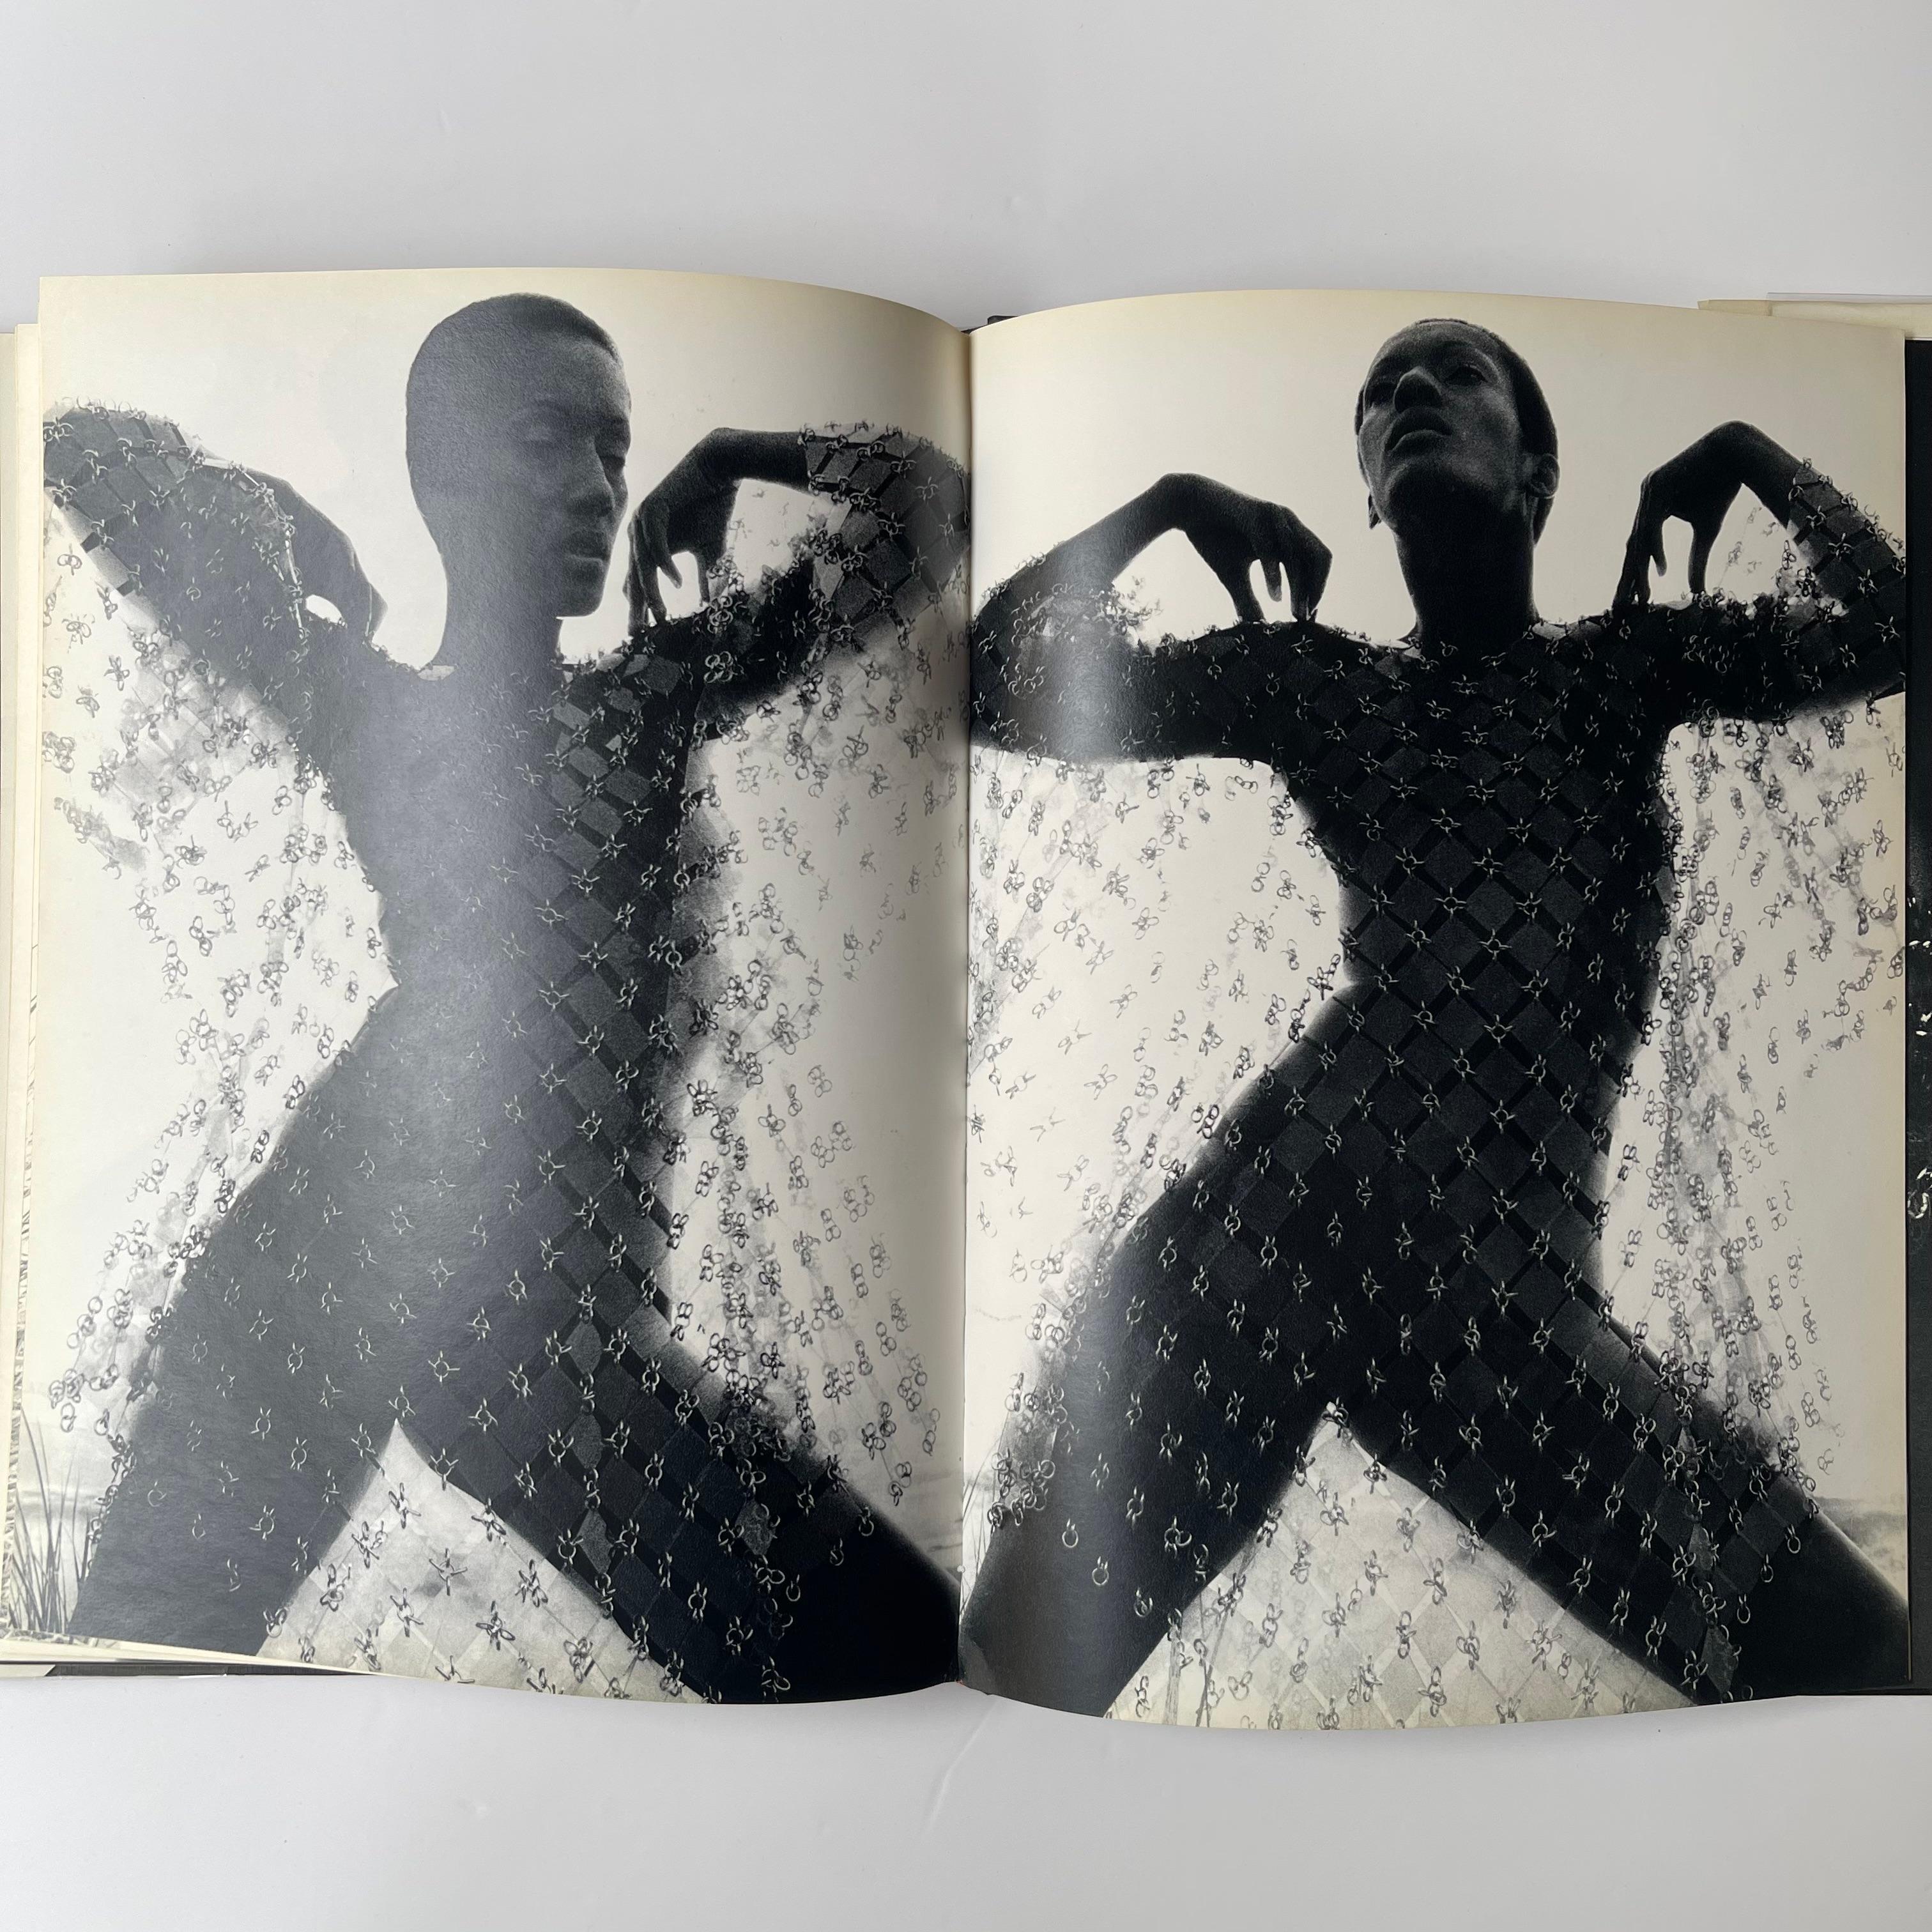 Canned Candies, The Exotic Women and Clothes of Paco Rabanne by Jean Clemmer  1